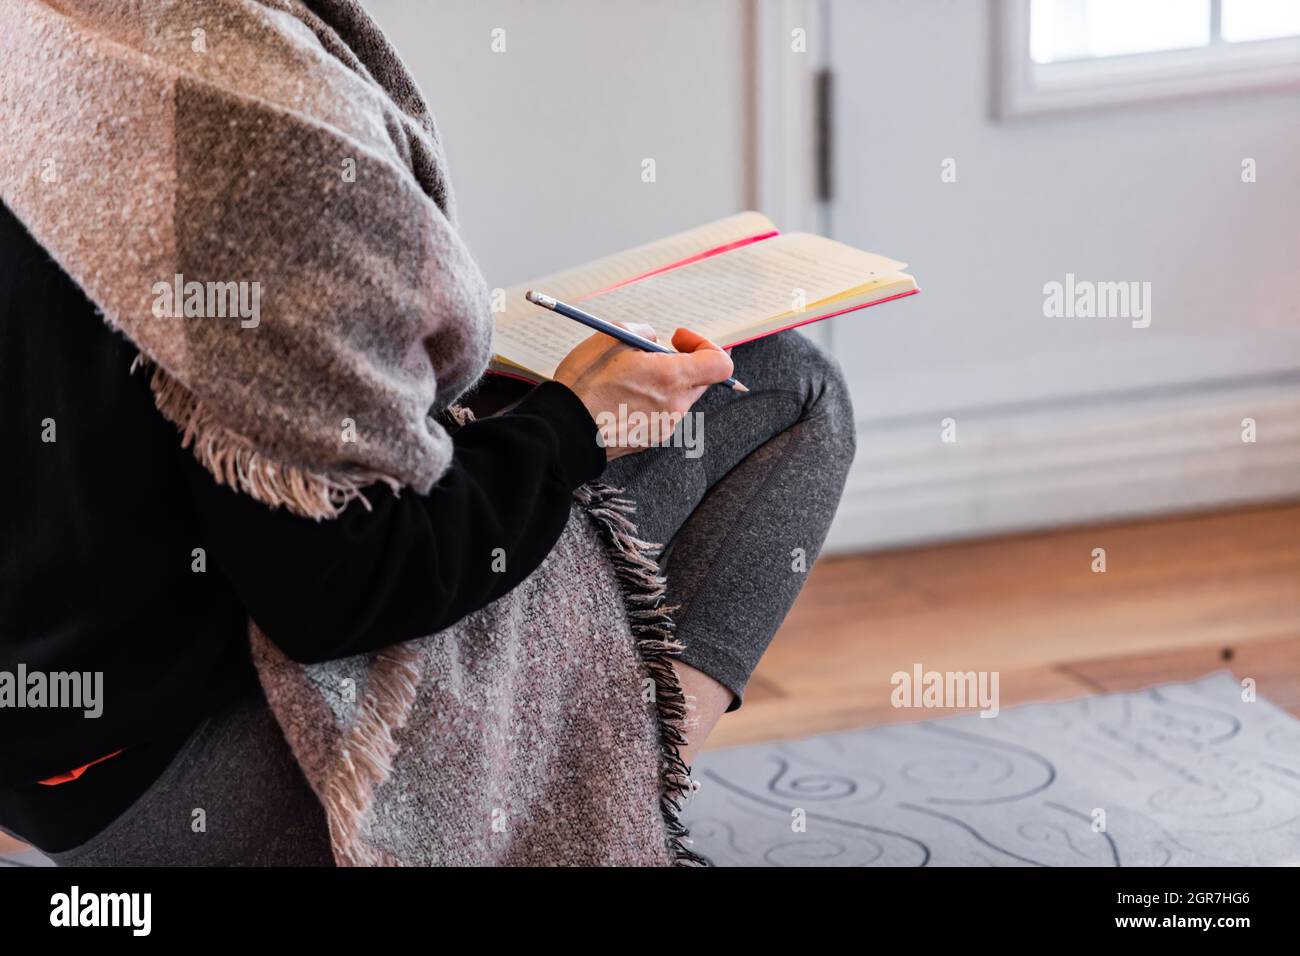 Midsection Of Woman Reading Book At Home Stock Photo